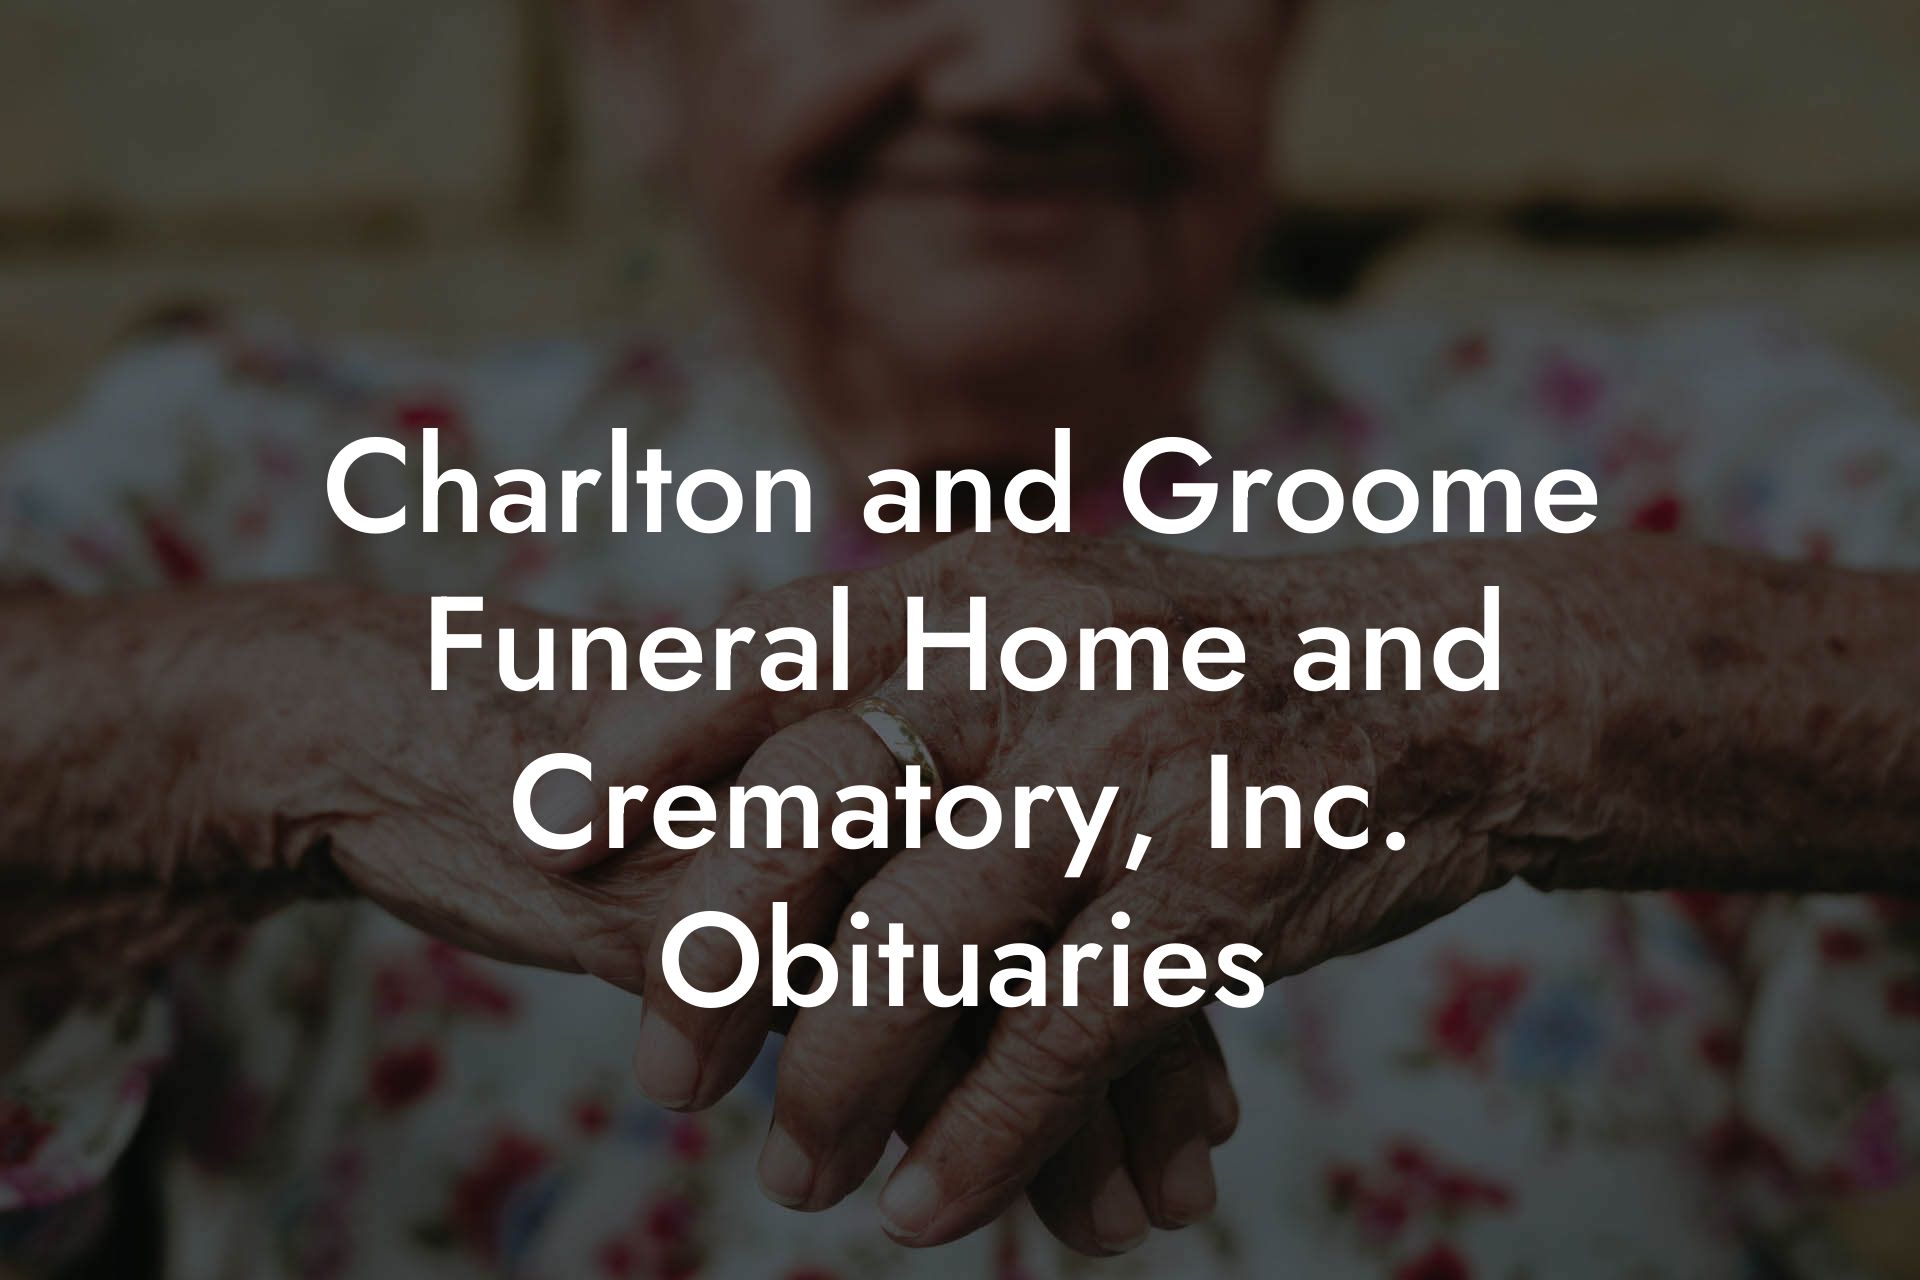 Charlton and Groome Funeral Home and Crematory, Inc. Obituaries